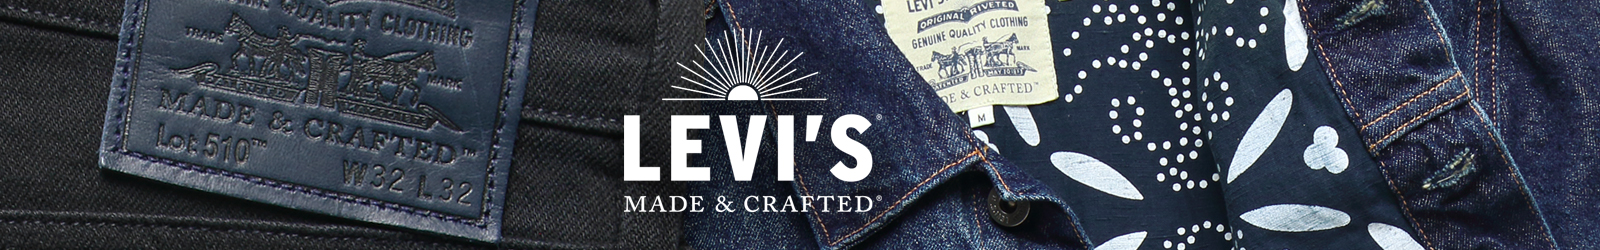 Levi's Made & Crafted | STAG